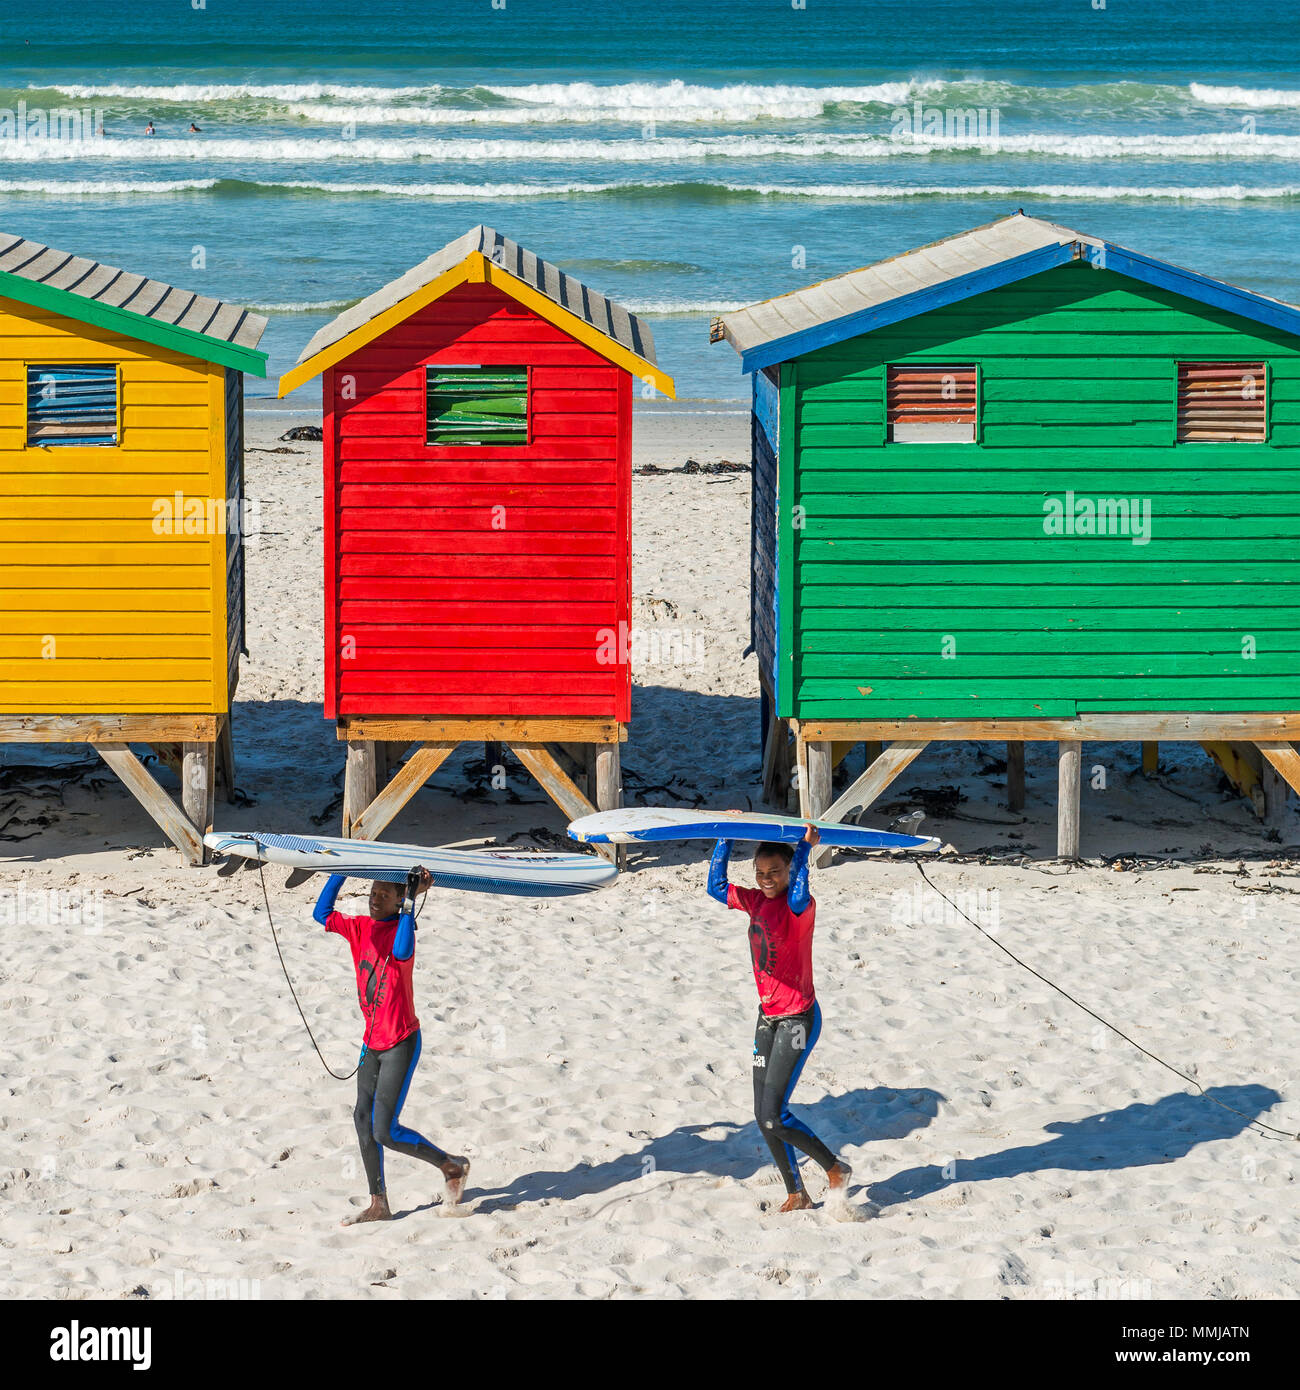 Smiling young South African surfers carrying their surfboards on the beach of Muizenberg, famous for the colorful beach huts, South Africa. Stock Photo